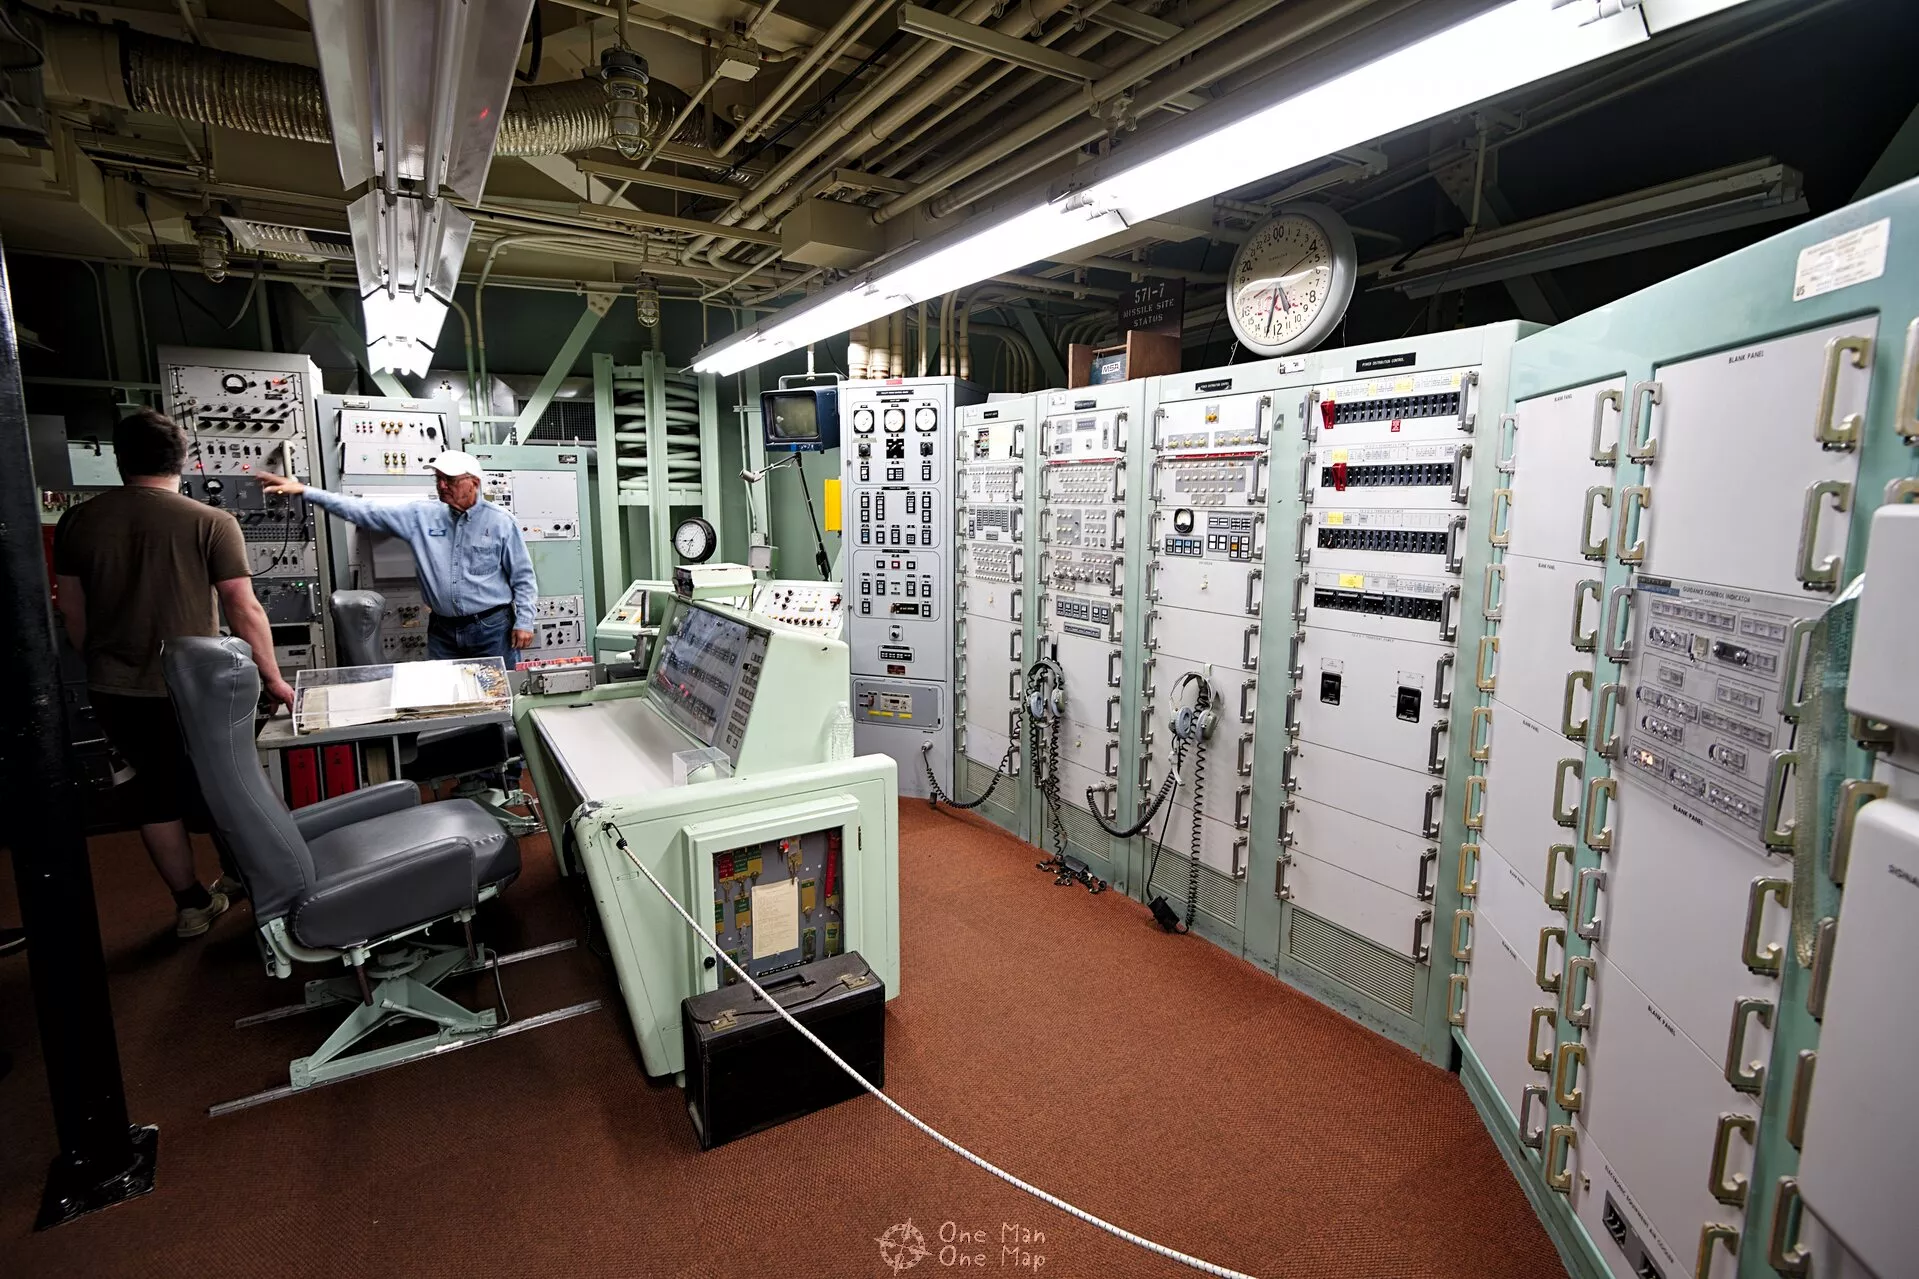 Titan Missile Museum in USA, North America | Museums - Rated 3.9